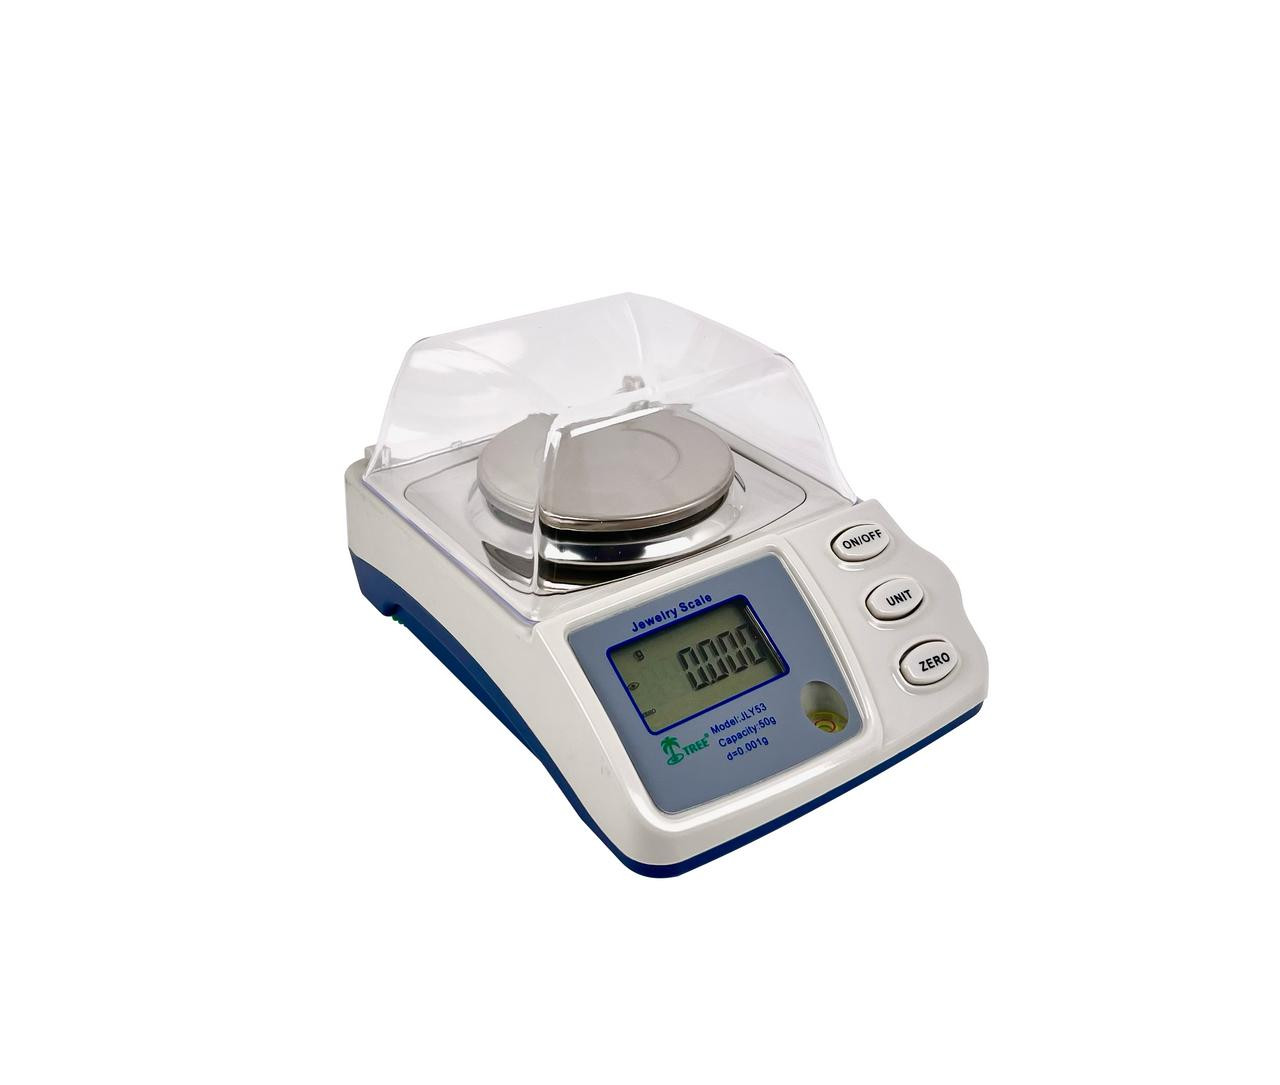 Digital Milligram Scale 50/0.001 Gram,Portable Jewelry Scale for